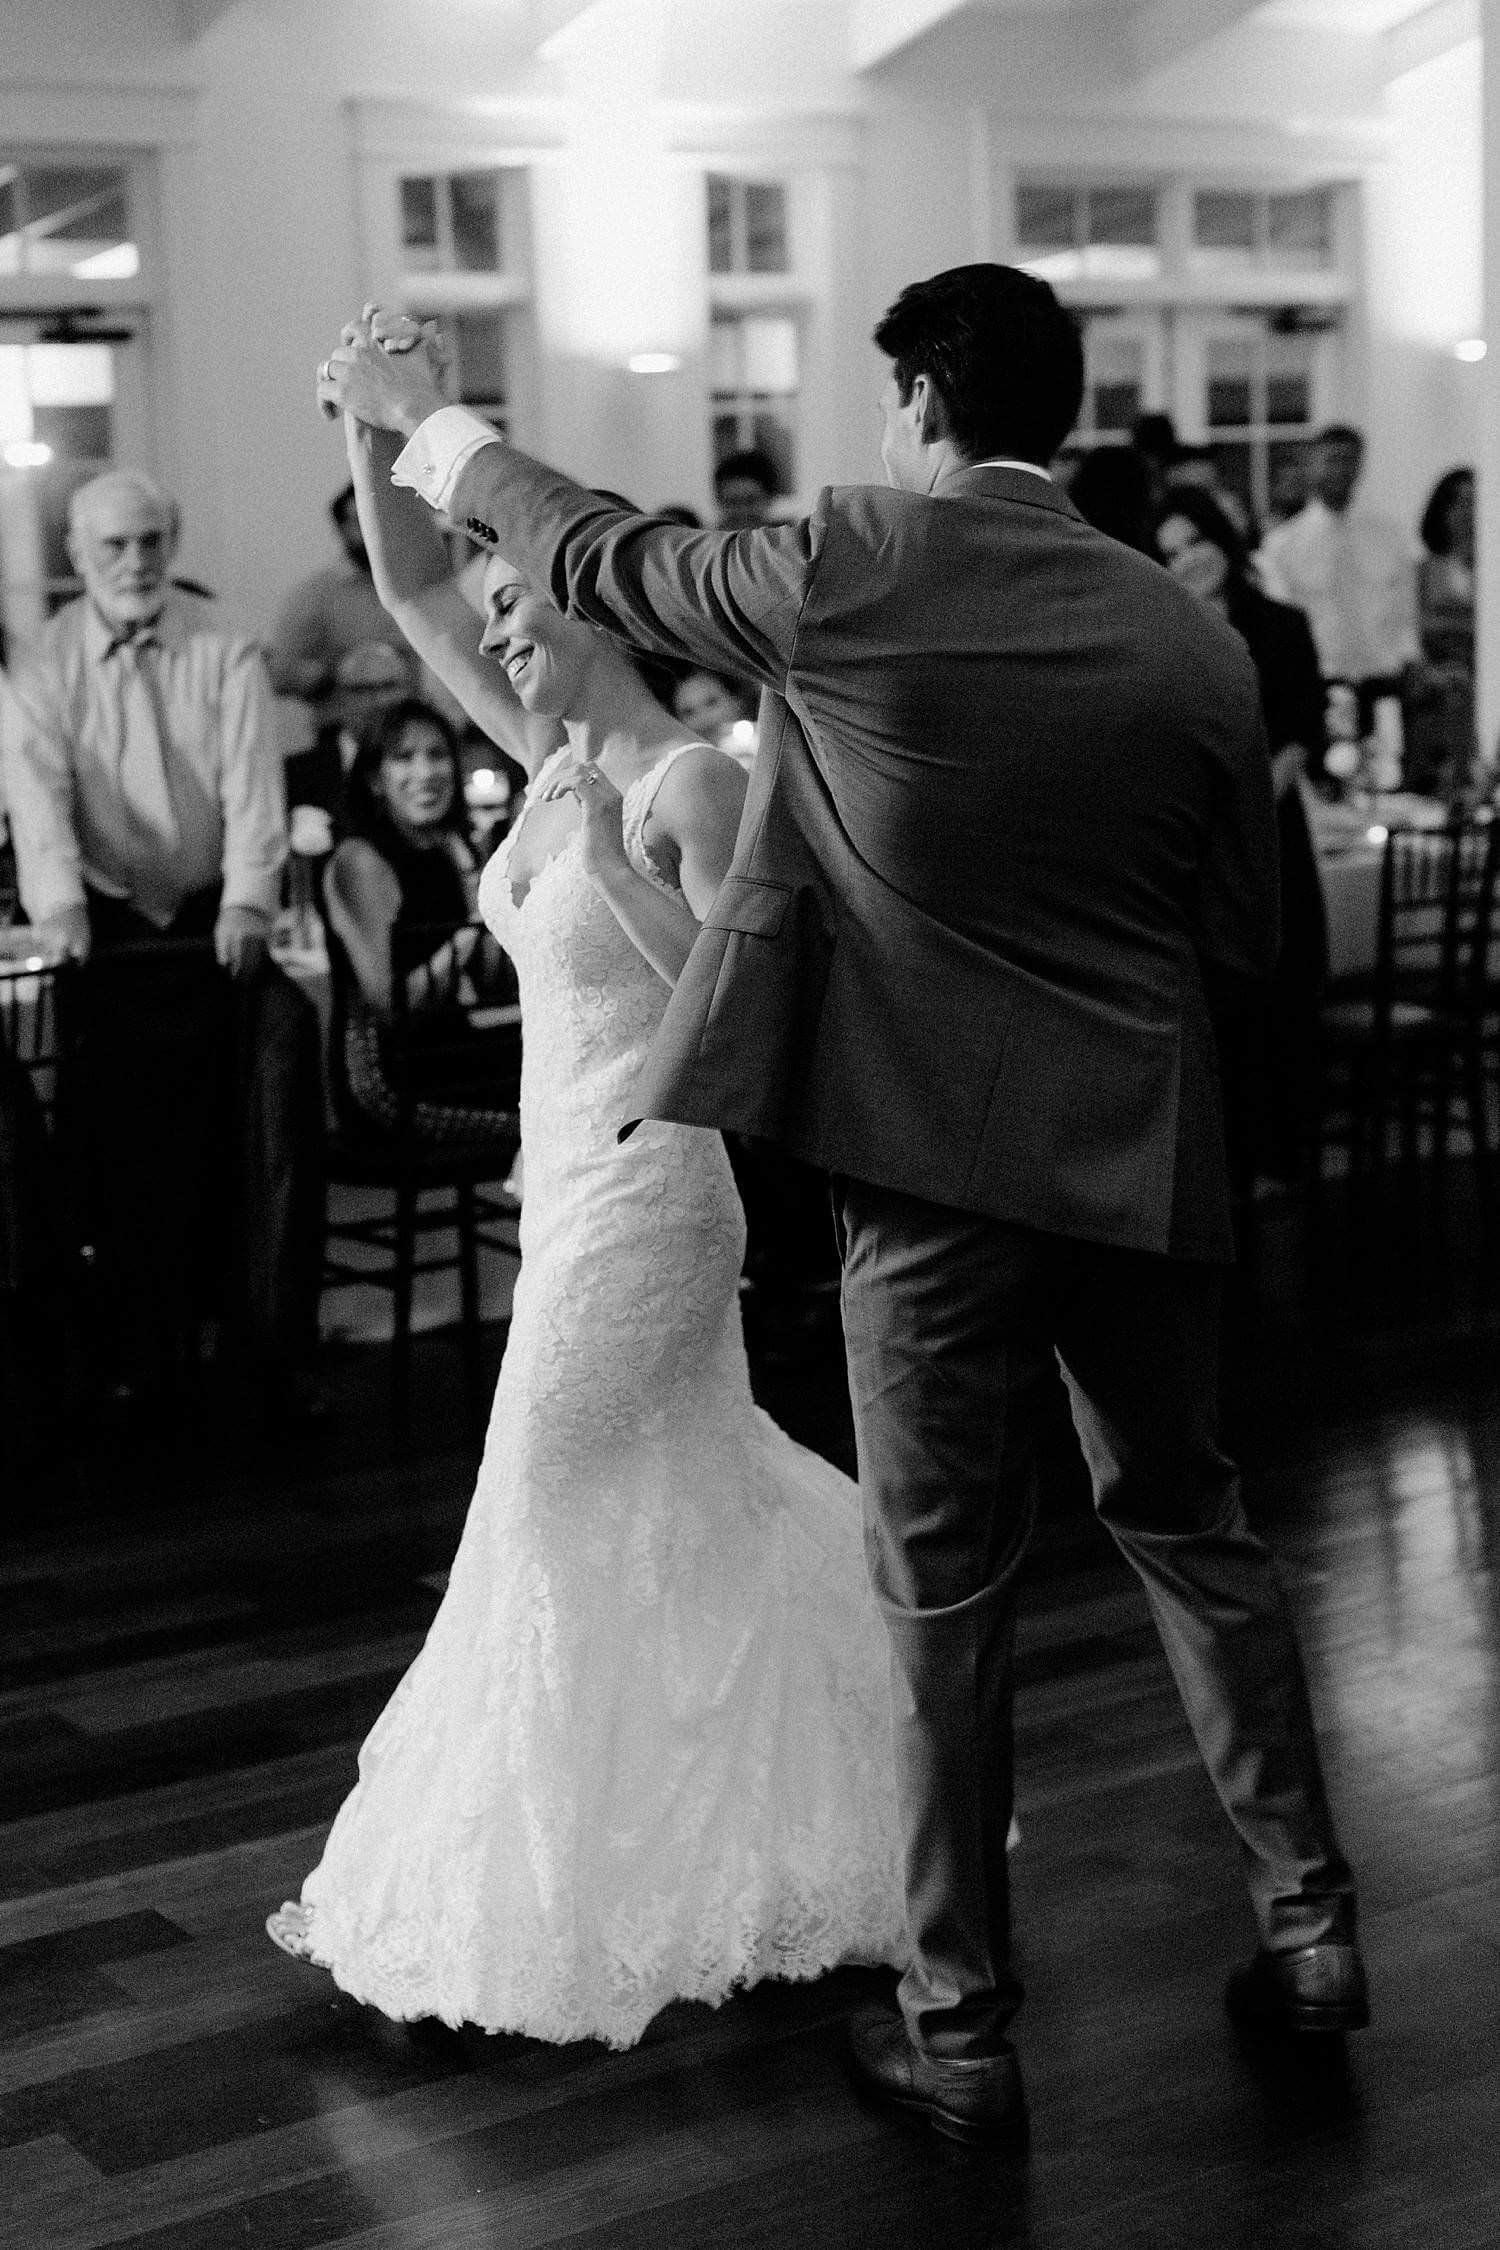 Bride & groom's first dance during their wedding reception at Upper Shirley Vineyards